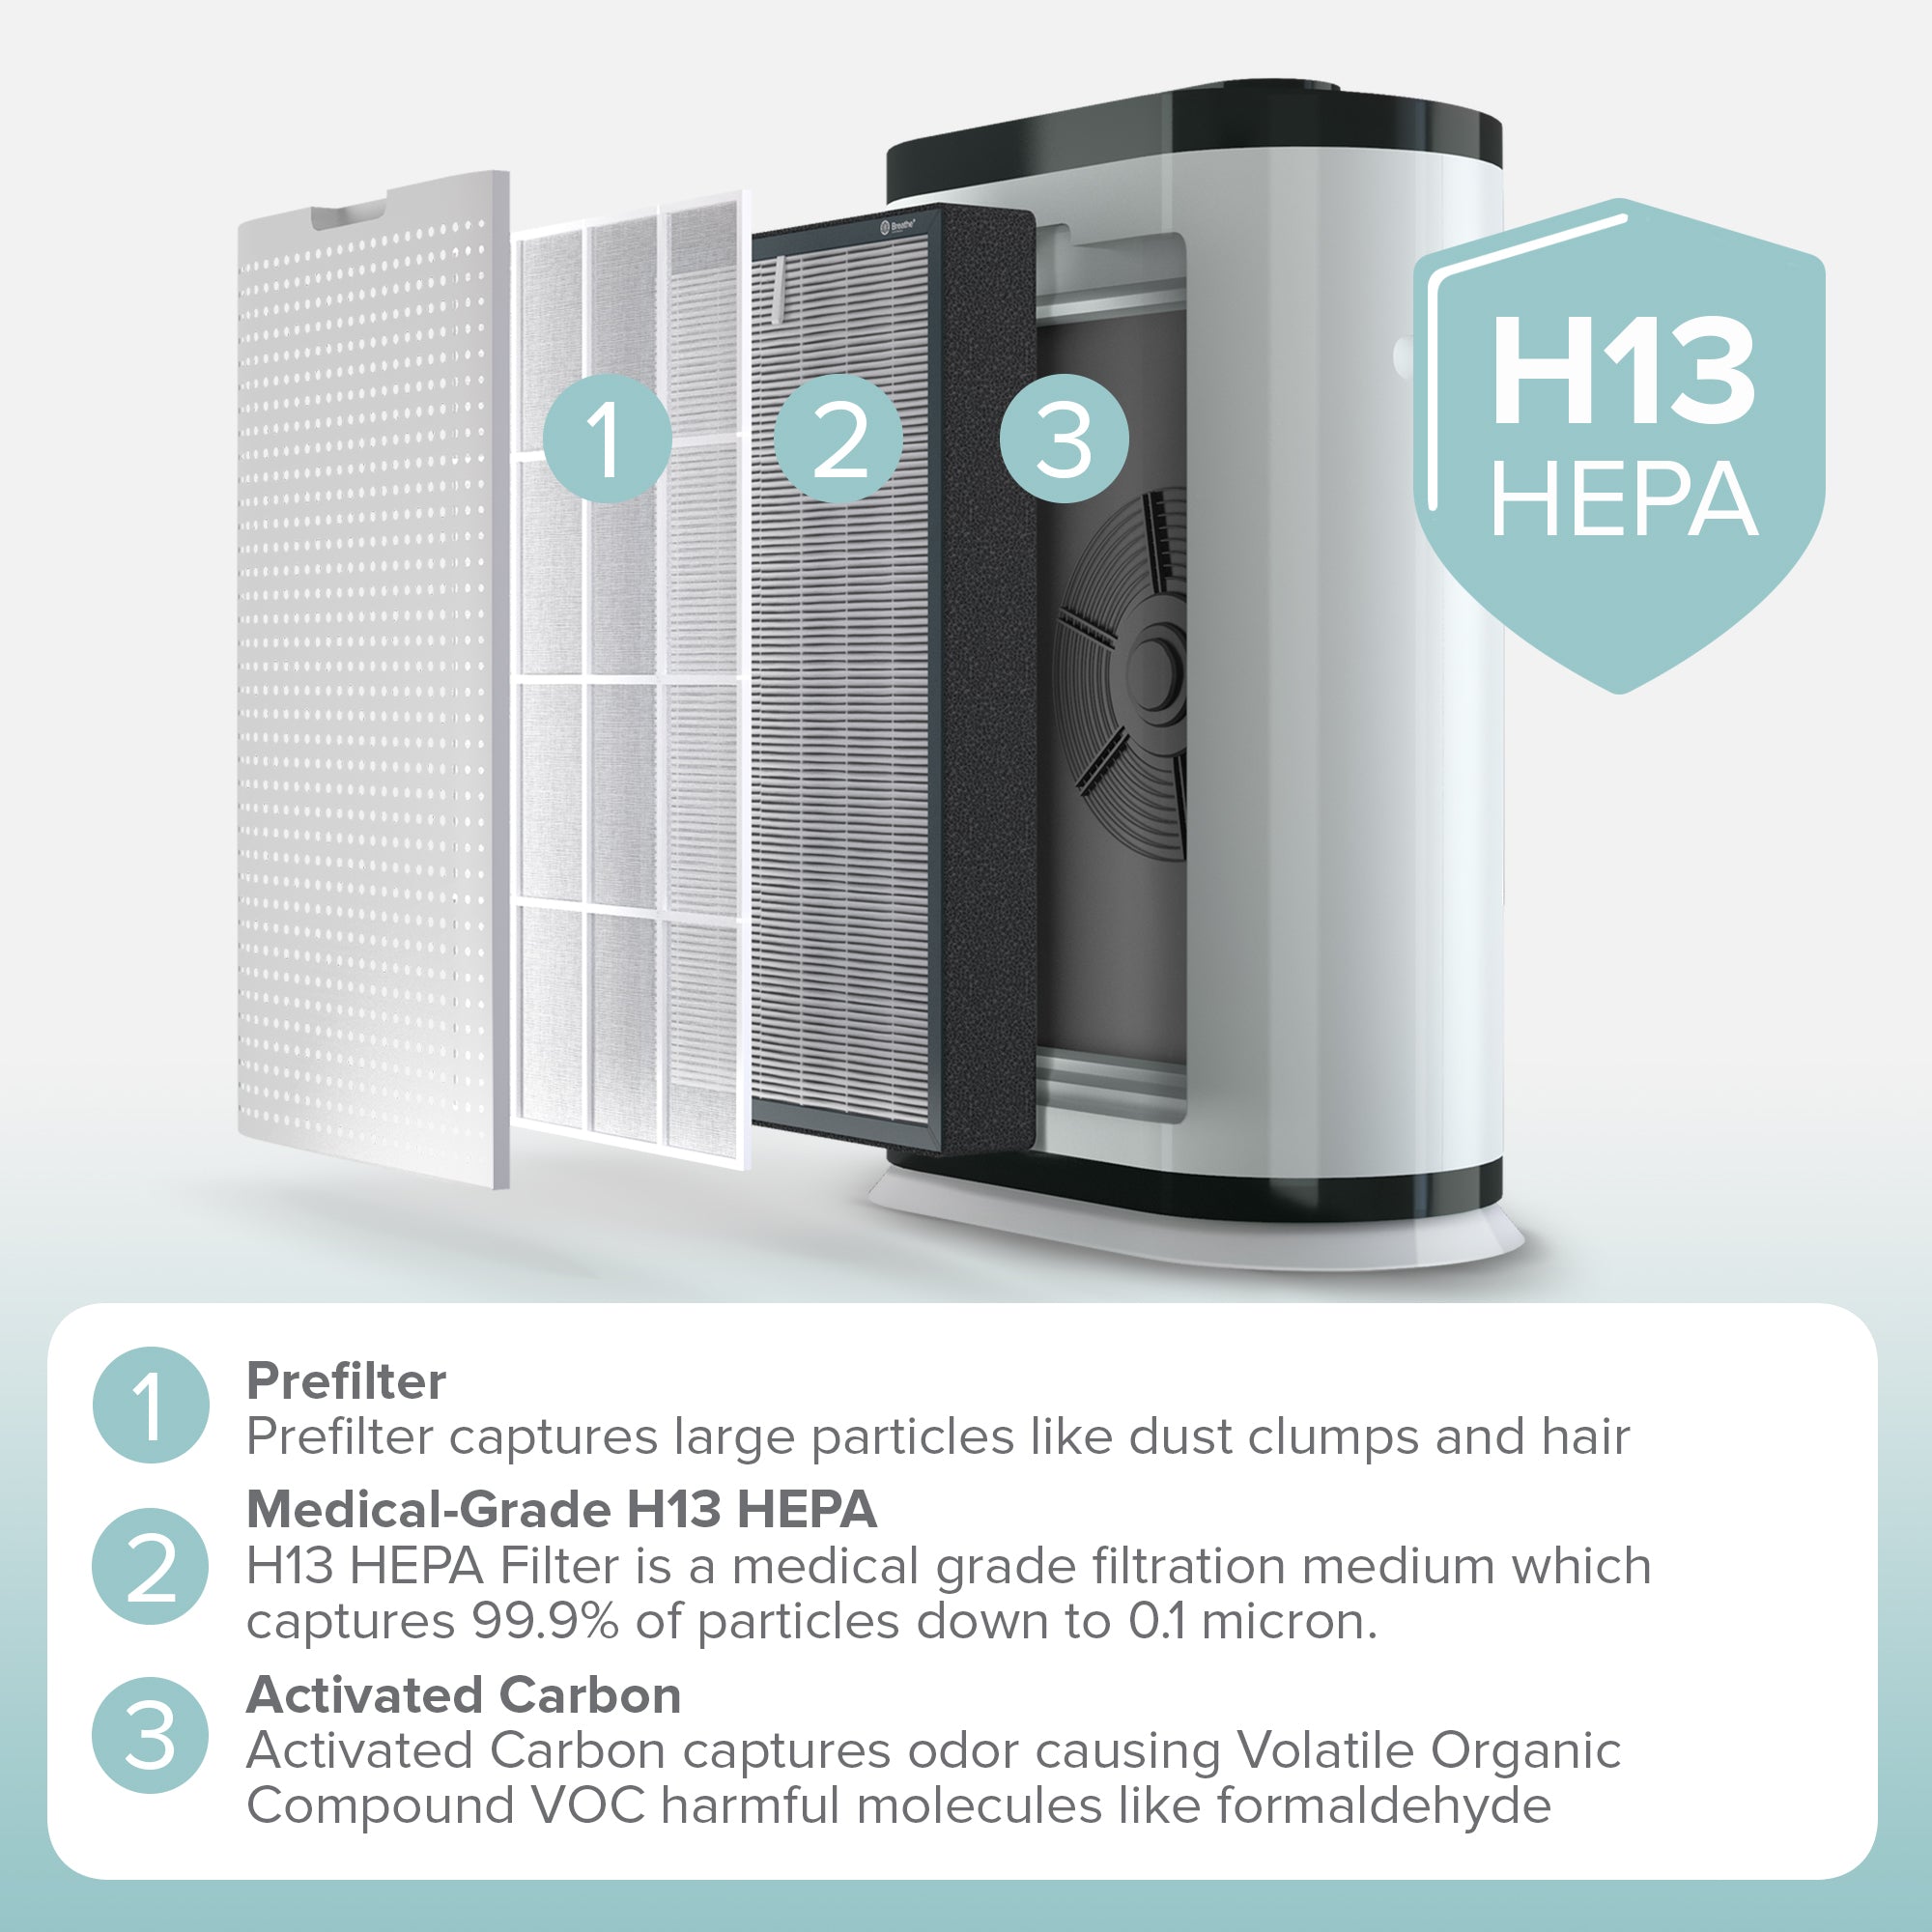 Breathe+ Pro Air Purifier: Medical Grade Air Purification System With Real-Time Air Quality Monitoring